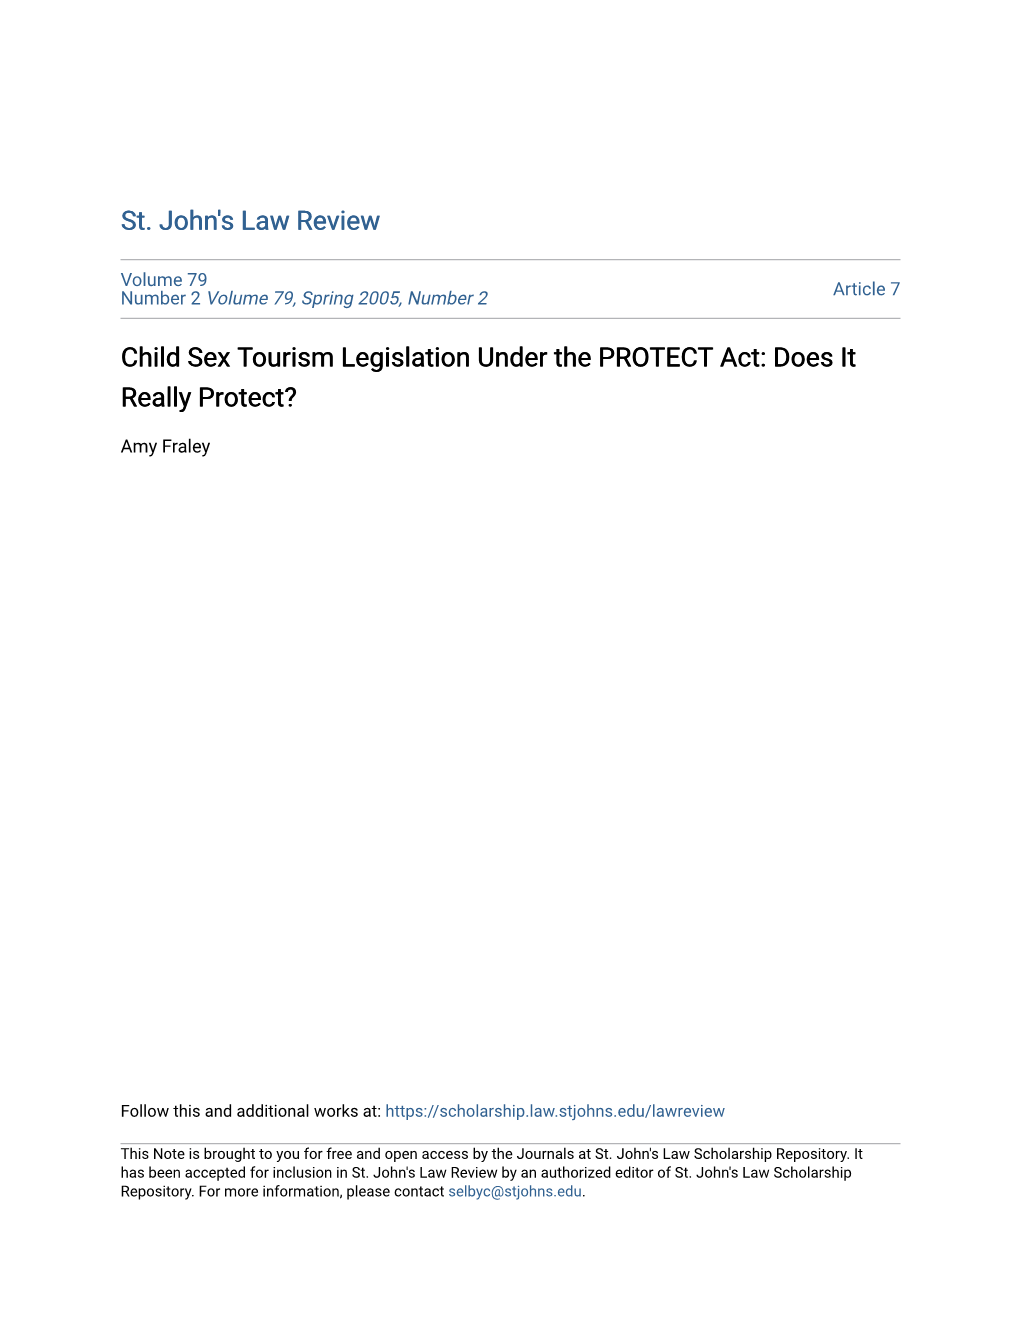 Child Sex Tourism Legislation Under the PROTECT Act: Does It Really Protect?